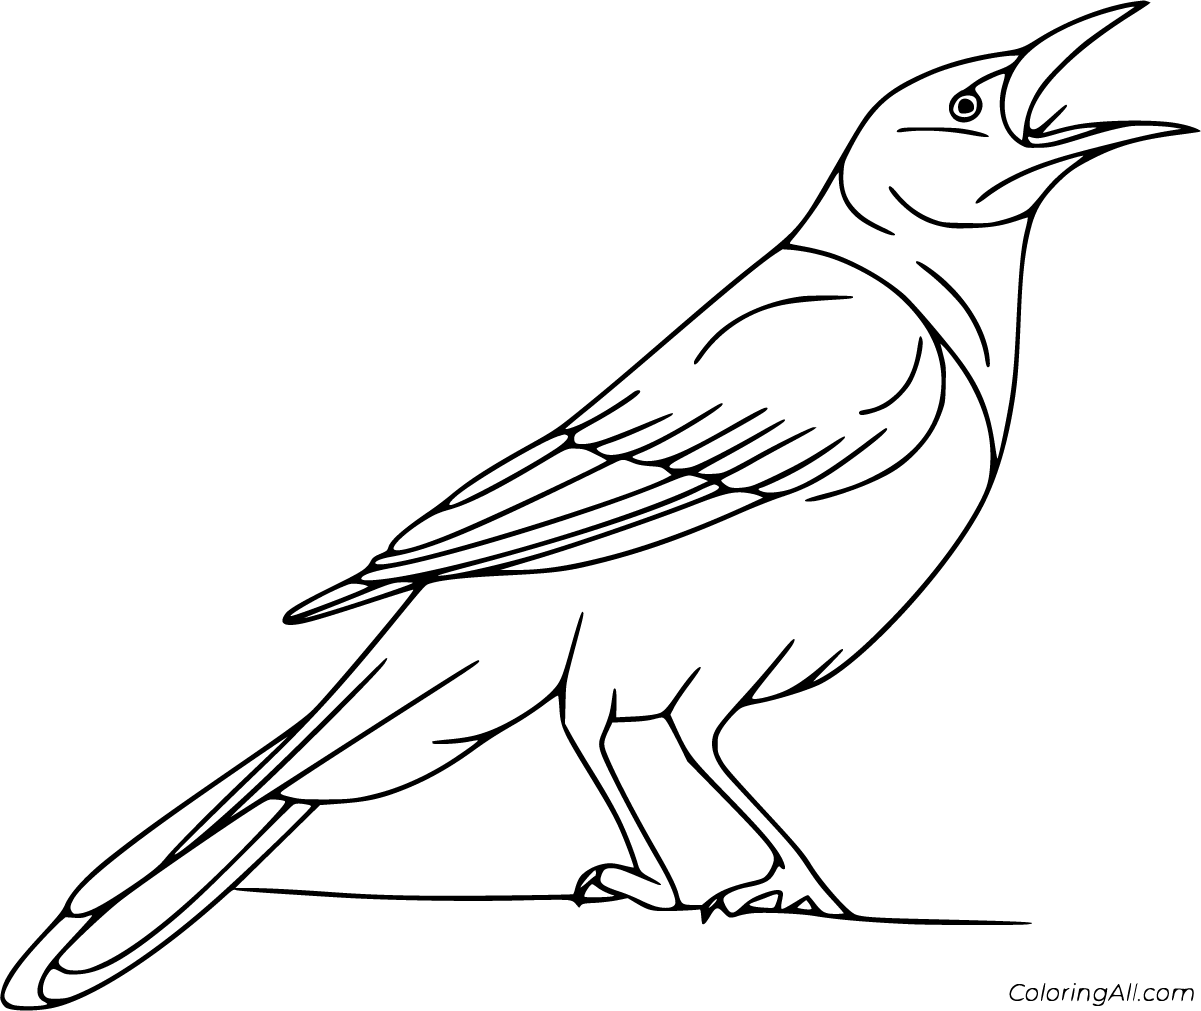 211 Simple Crow Coloring Page with Printable